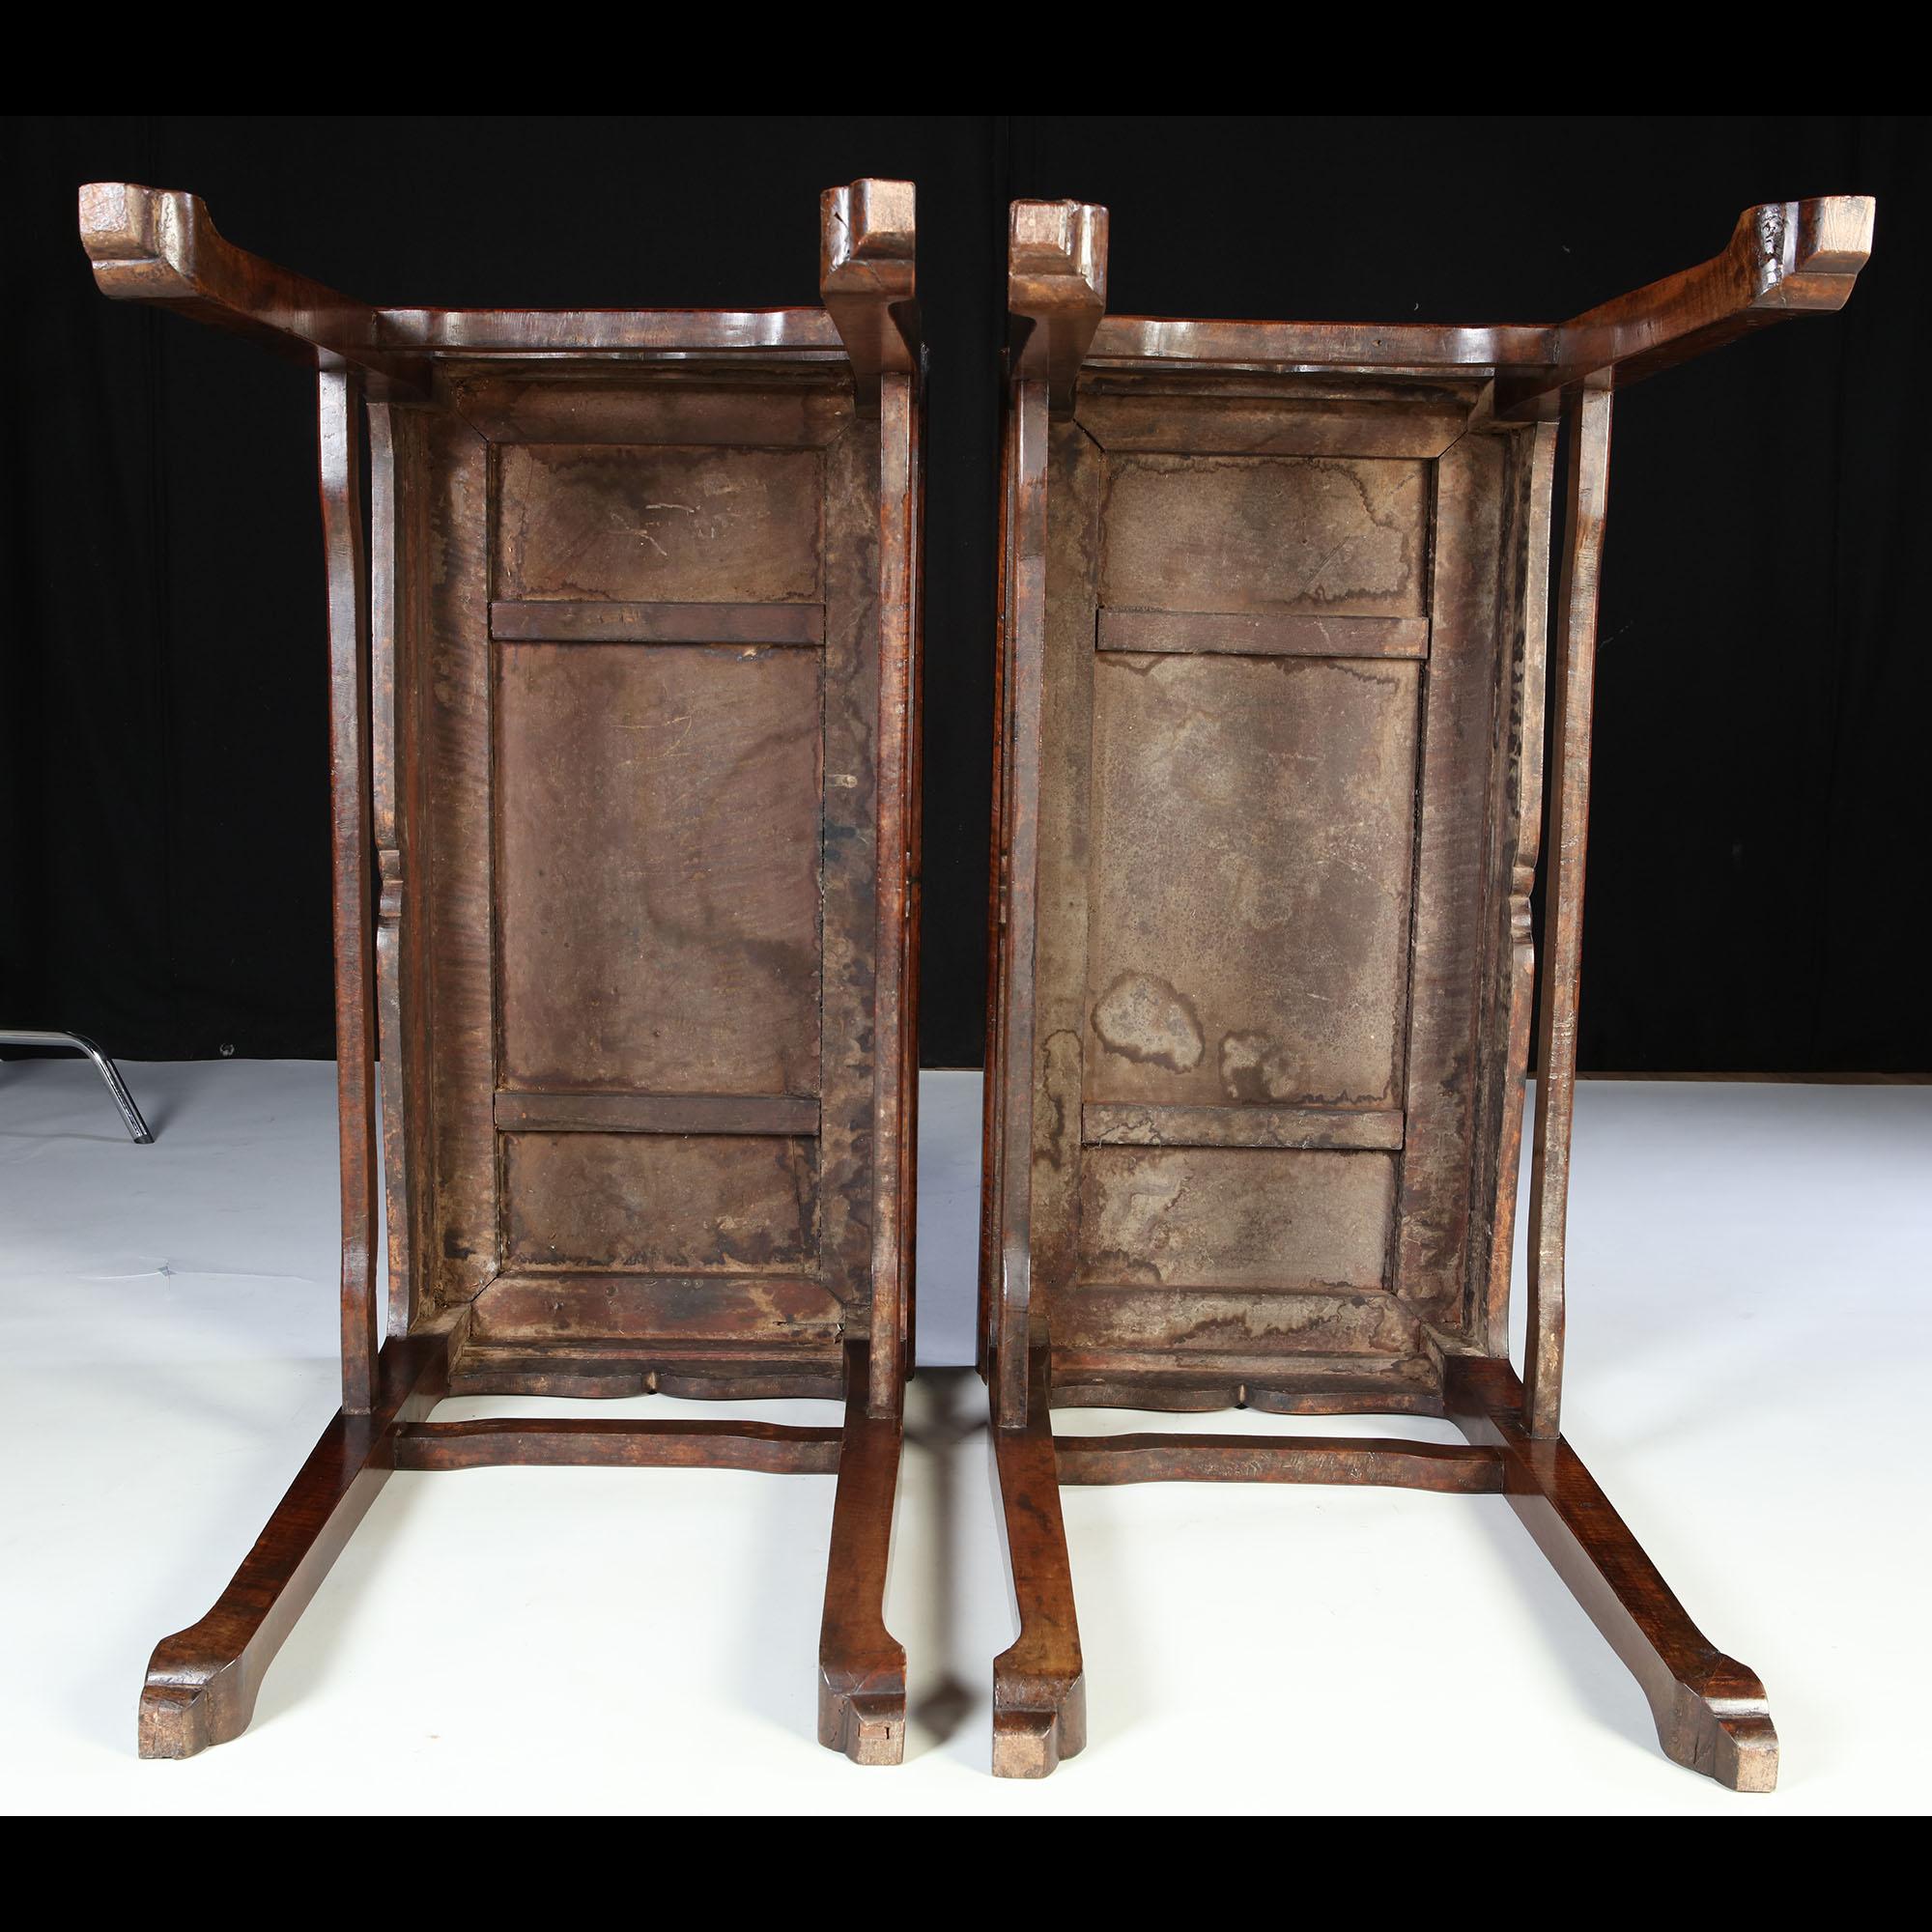 Pair of Chinese Qing Dynasty Longyanmu Side Tables In Good Condition For Sale In London, by appointment only